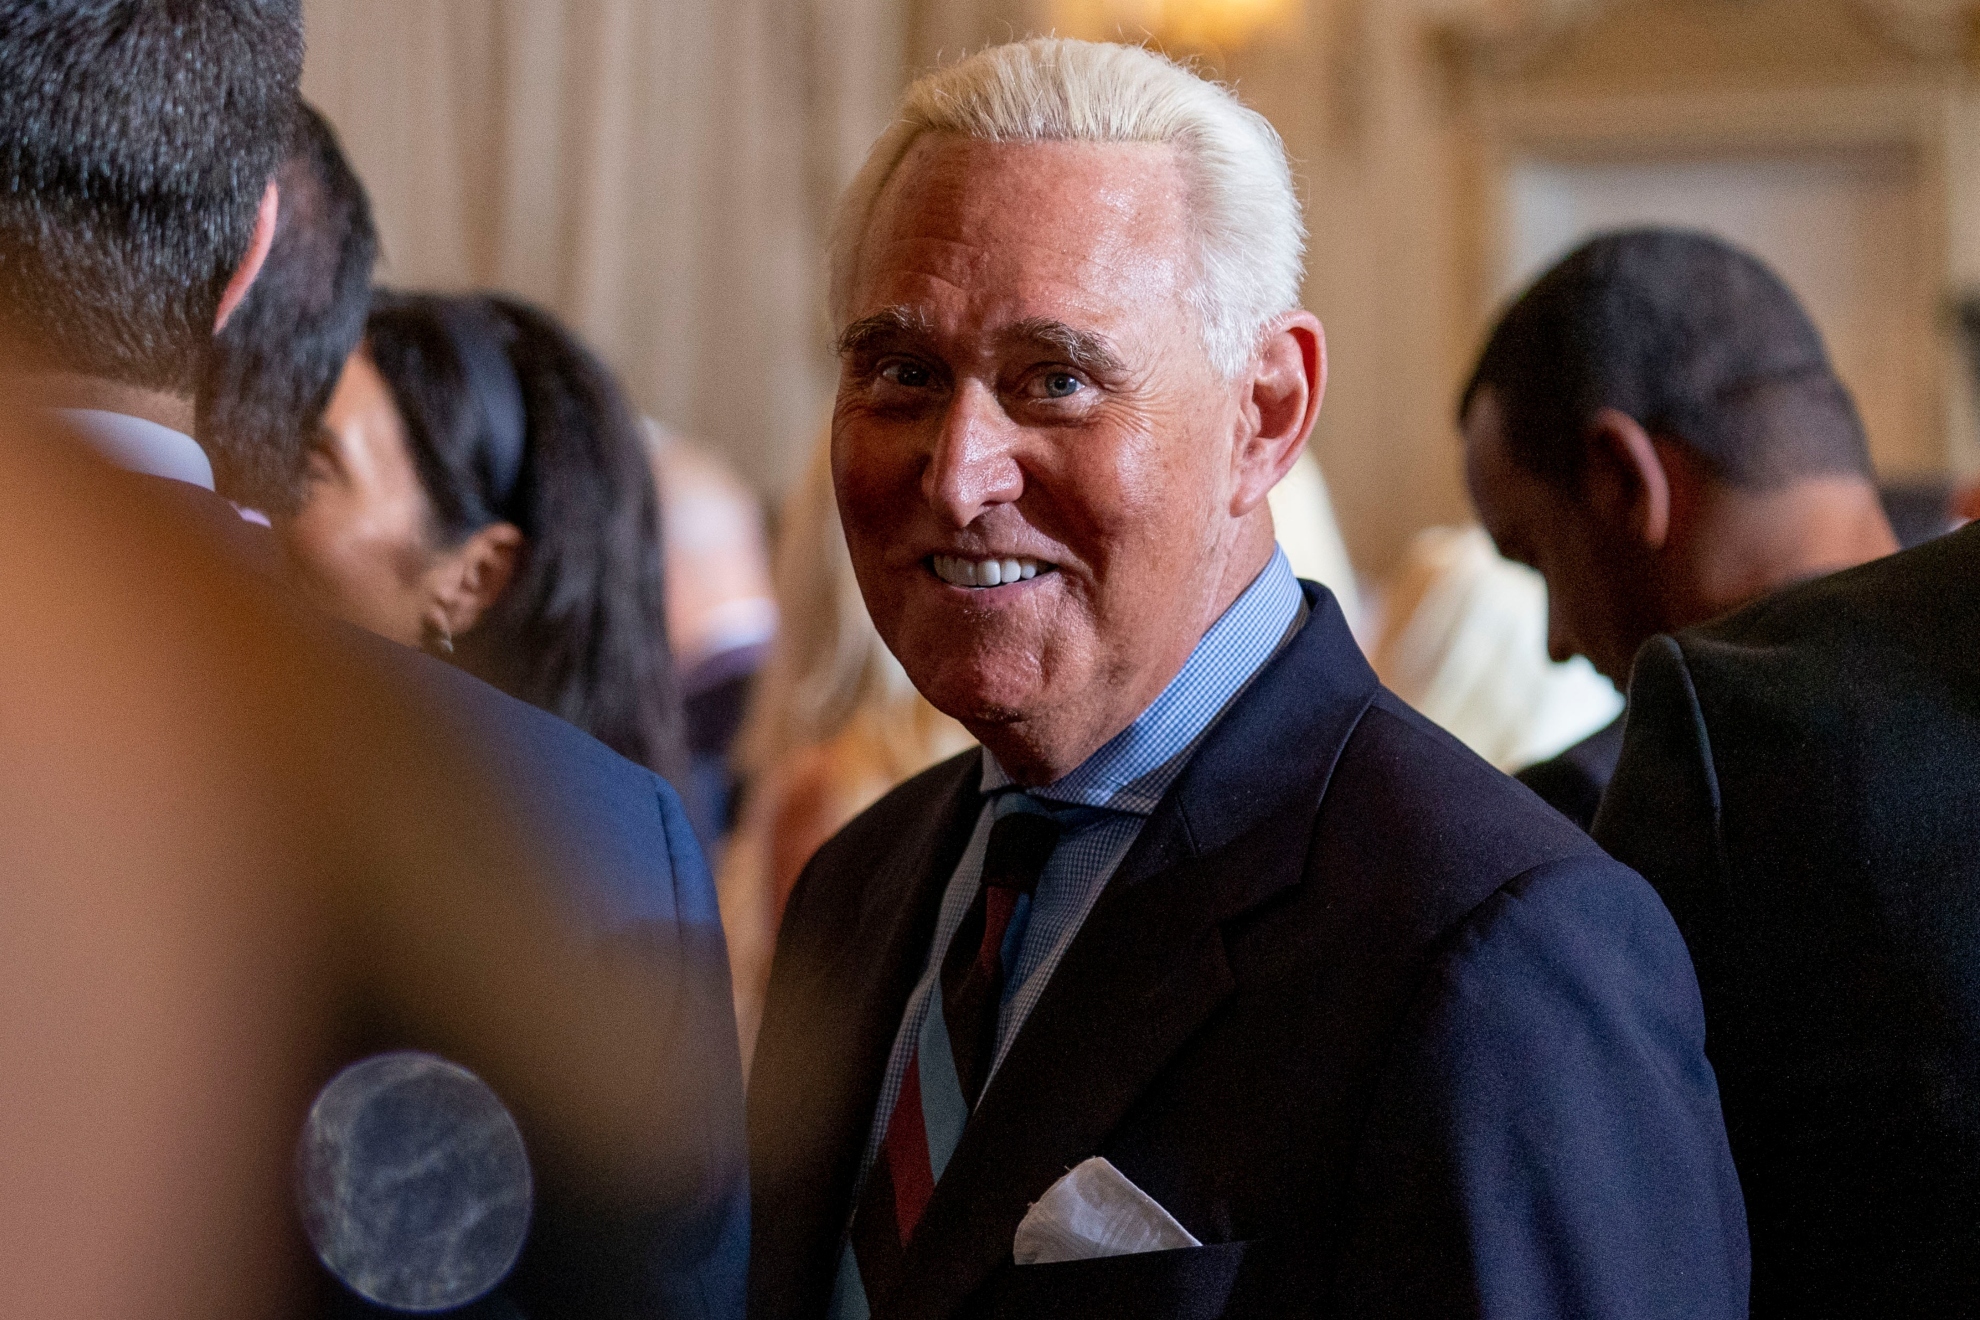 Roger Stone's election disruption strategy exposed in leaked video